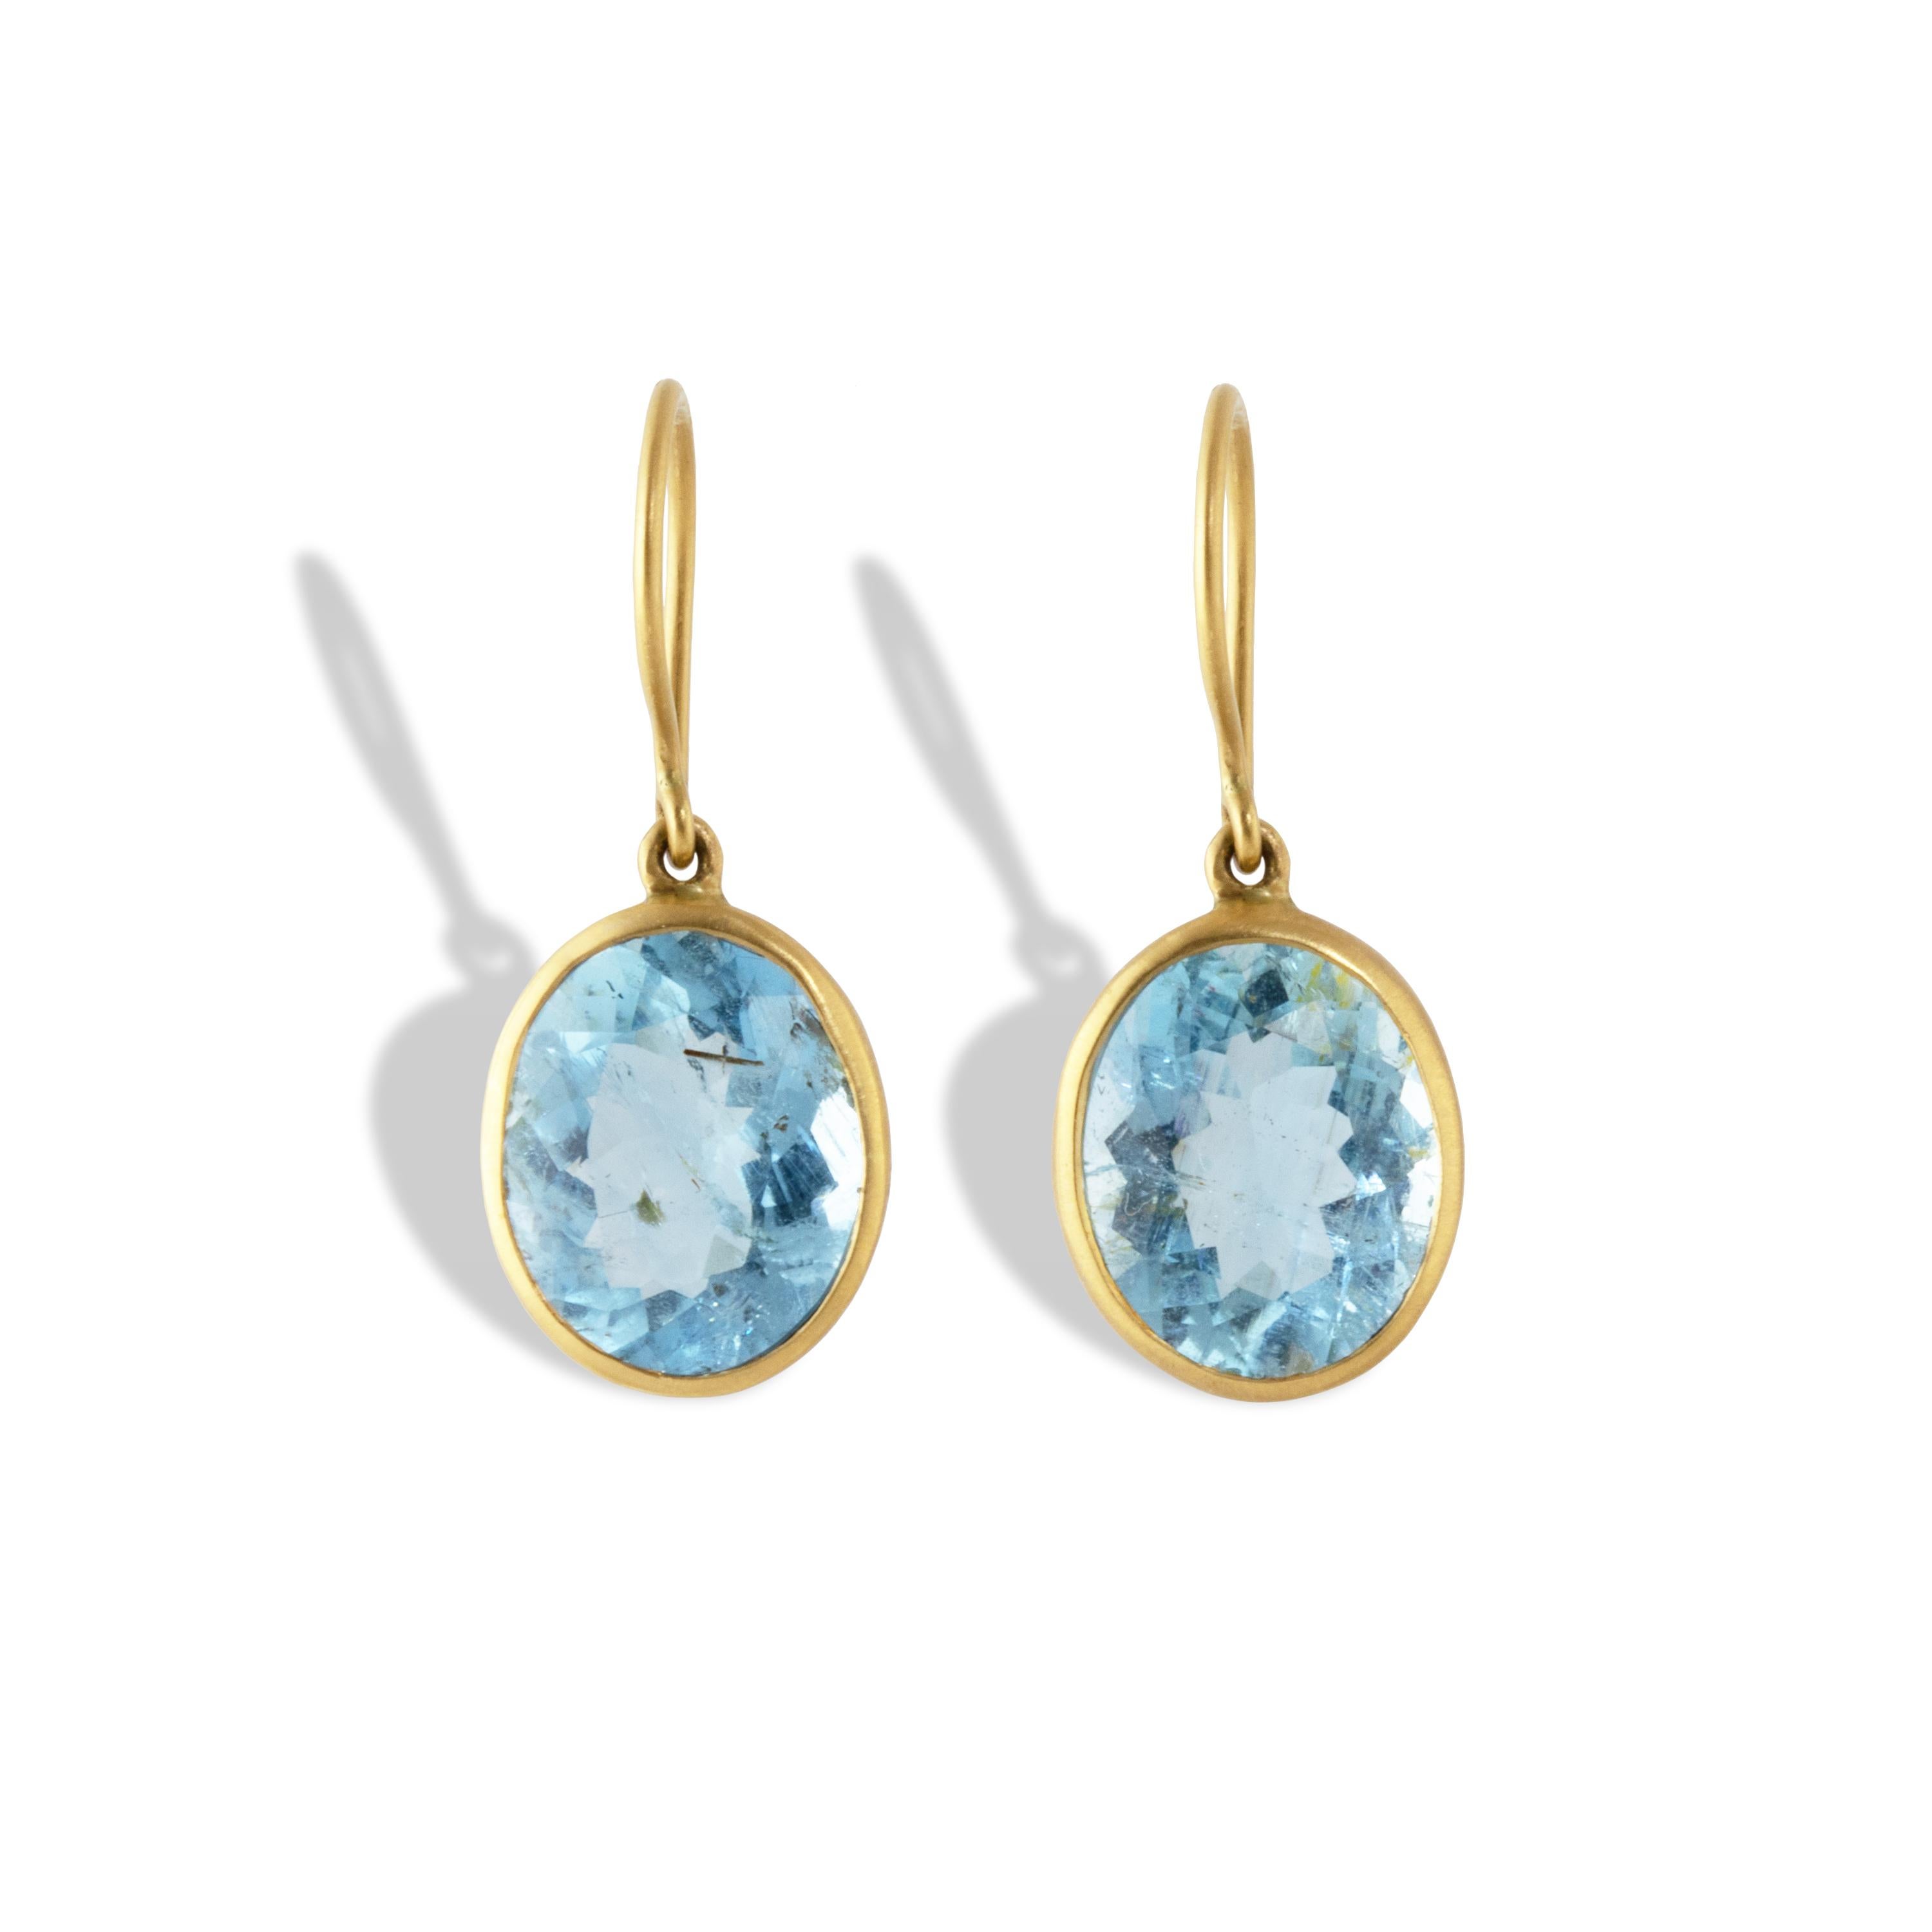 Elegant aquamarine earrings featuring spectacular bright blue aquamarine gemstones, approx. 11.52 carats total weight, set in a in a wavy 20k gold setting.  These earrings have a brushed finish and the setting was made entirely by hand. Santa Maria